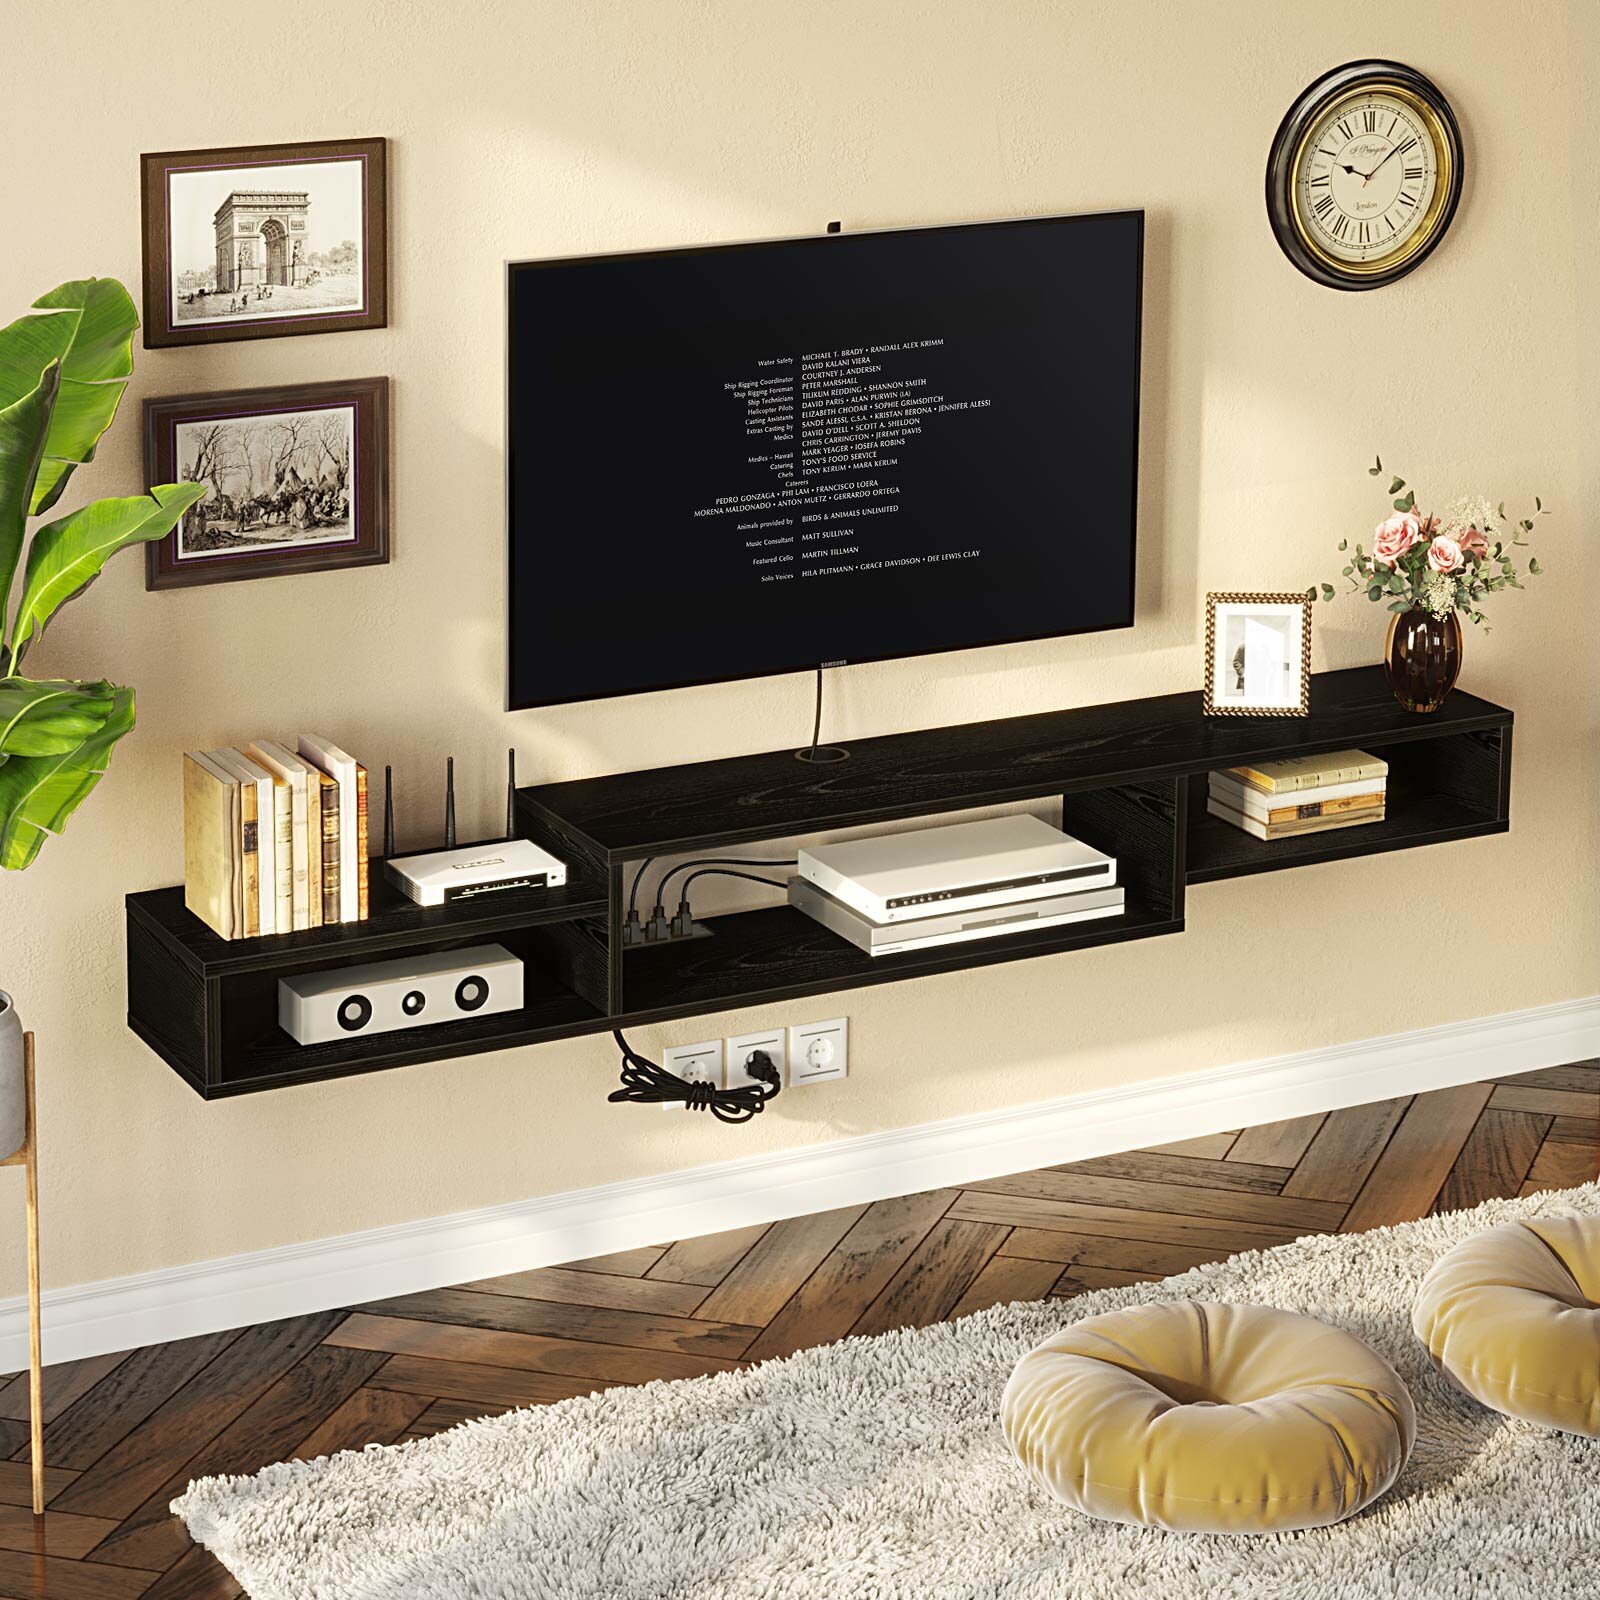 Very low profile tv console with a sleek, modular finish